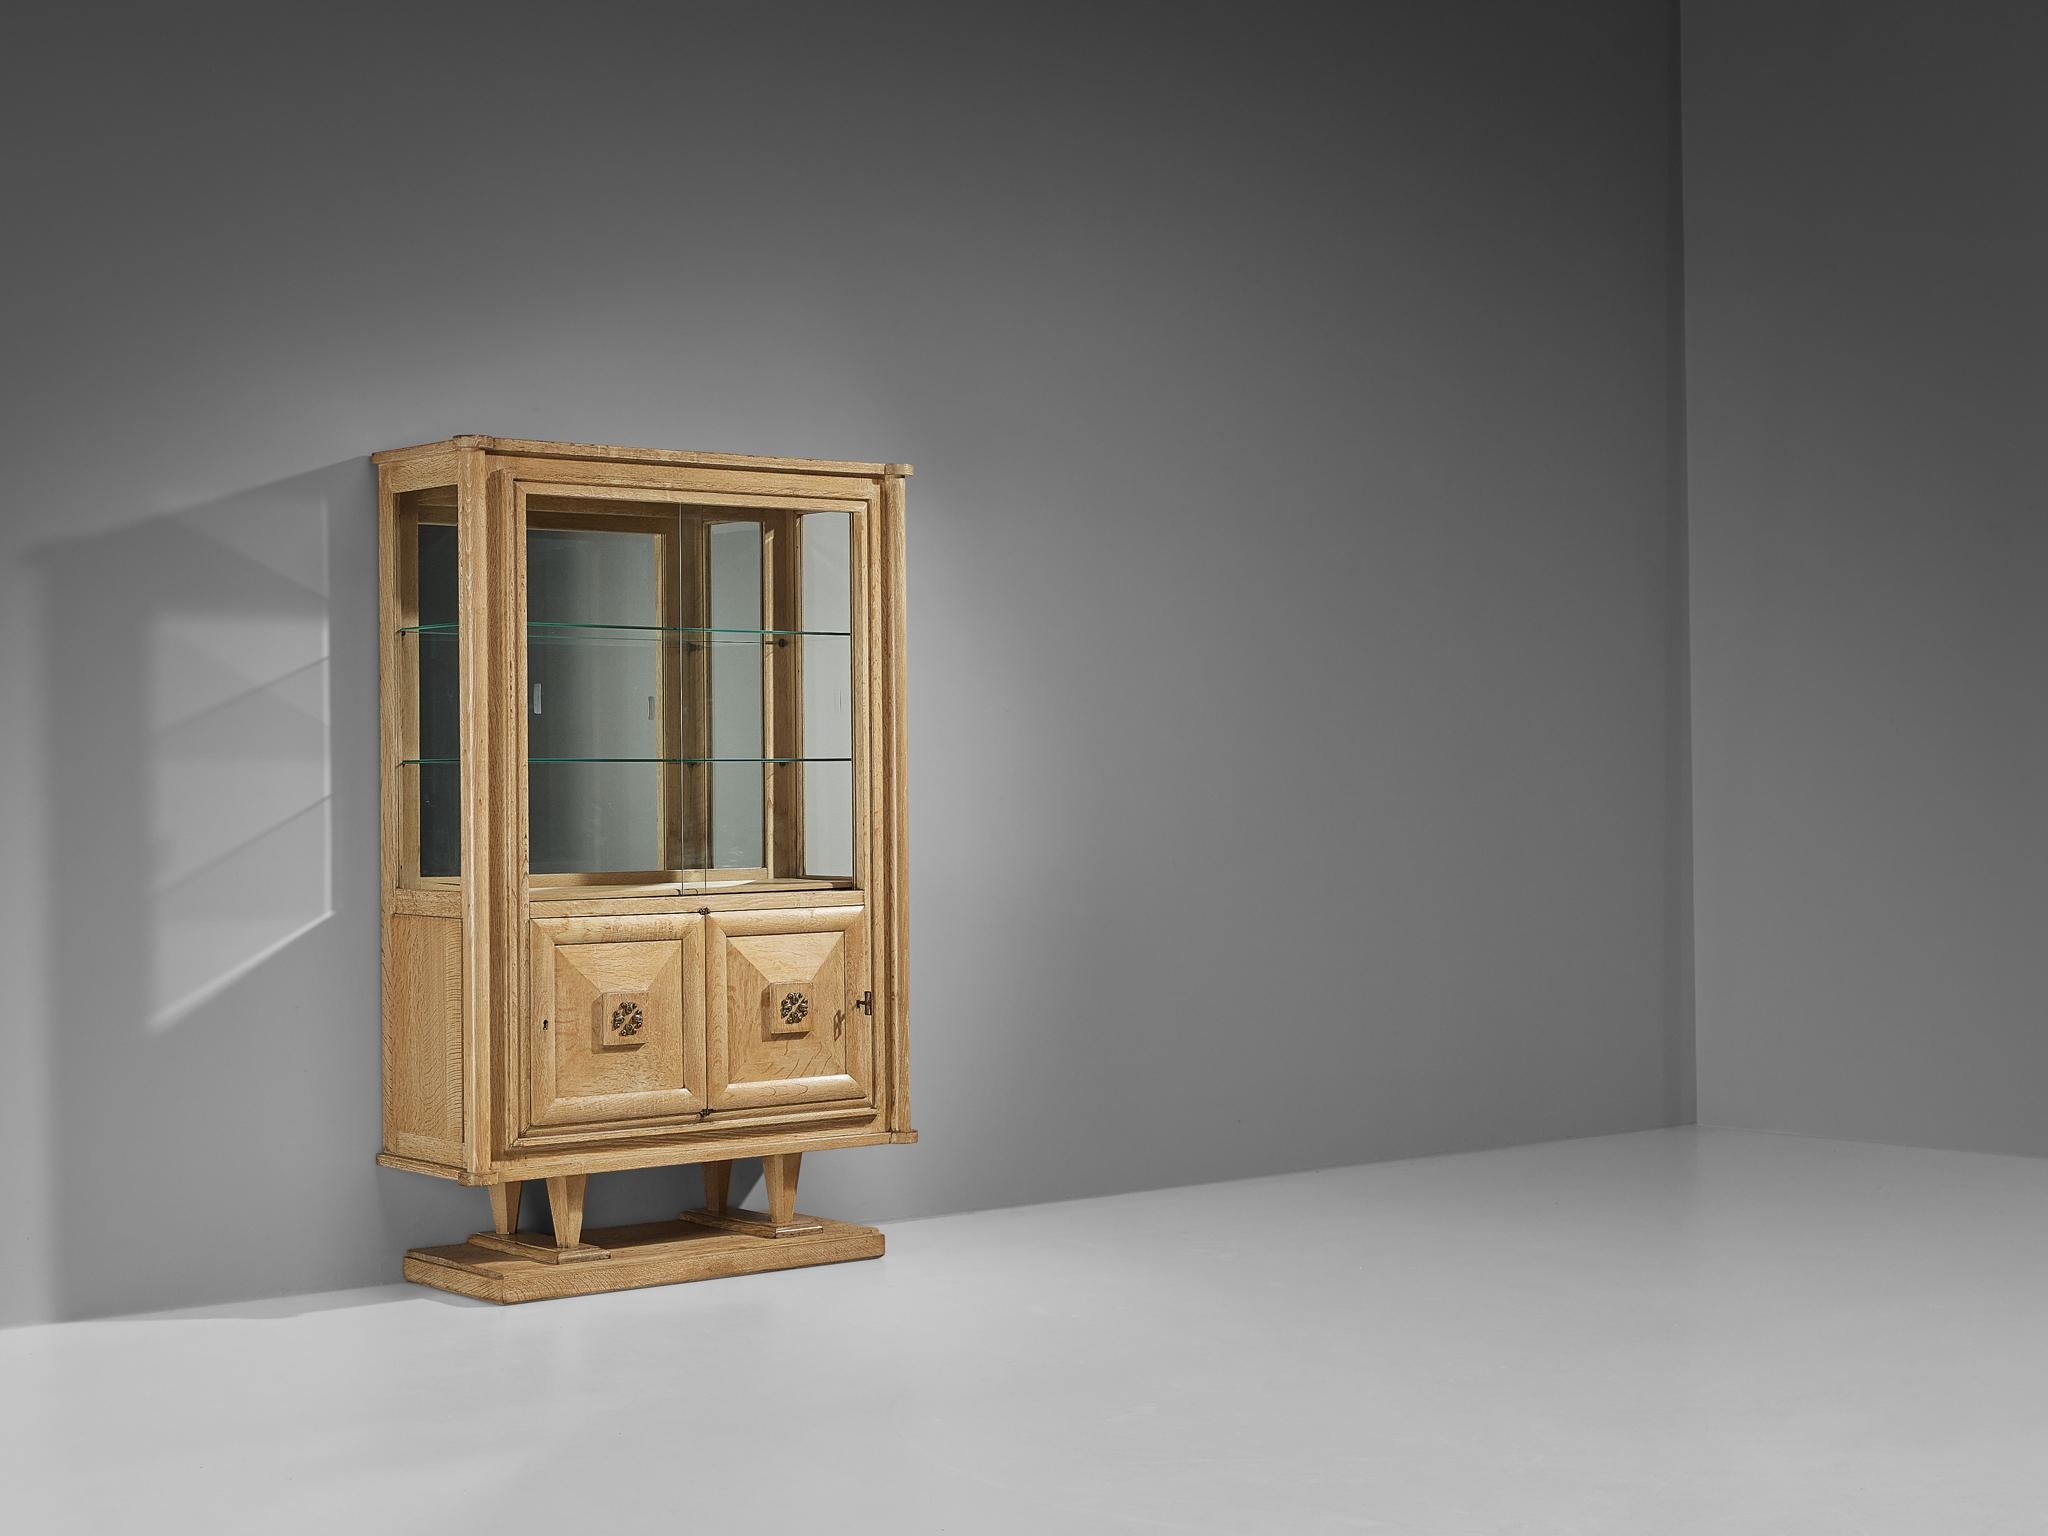 Gaston Poisson cabinet, oak, glass, brass, France, 1940s

Nice detailed cabinet in oak and glass. The high storage part consist of a vitrine part, with two glass shelves and a mirrored back. The lower part is a cabinet with two doors. This cabinet